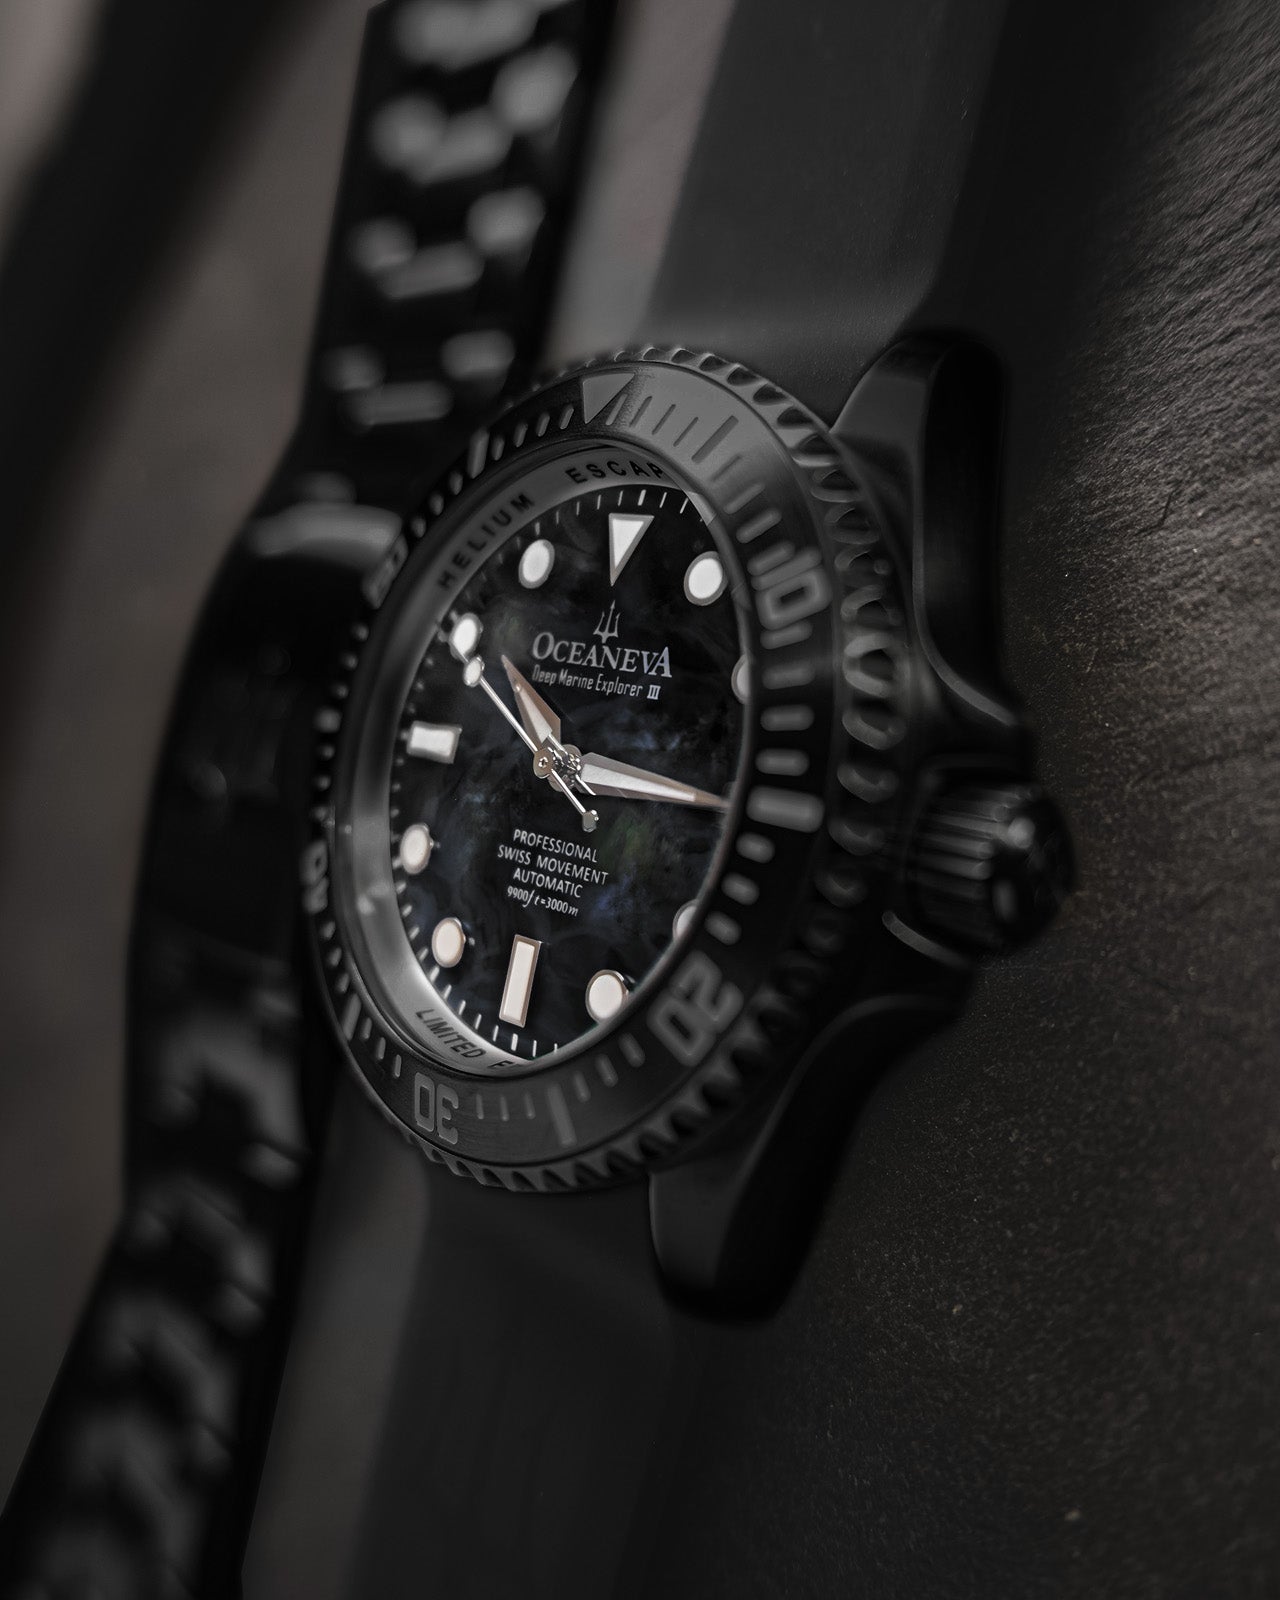 Oceaneva 3000M Dive Watch Black Mother of Pearl Side View With Rubber Strap